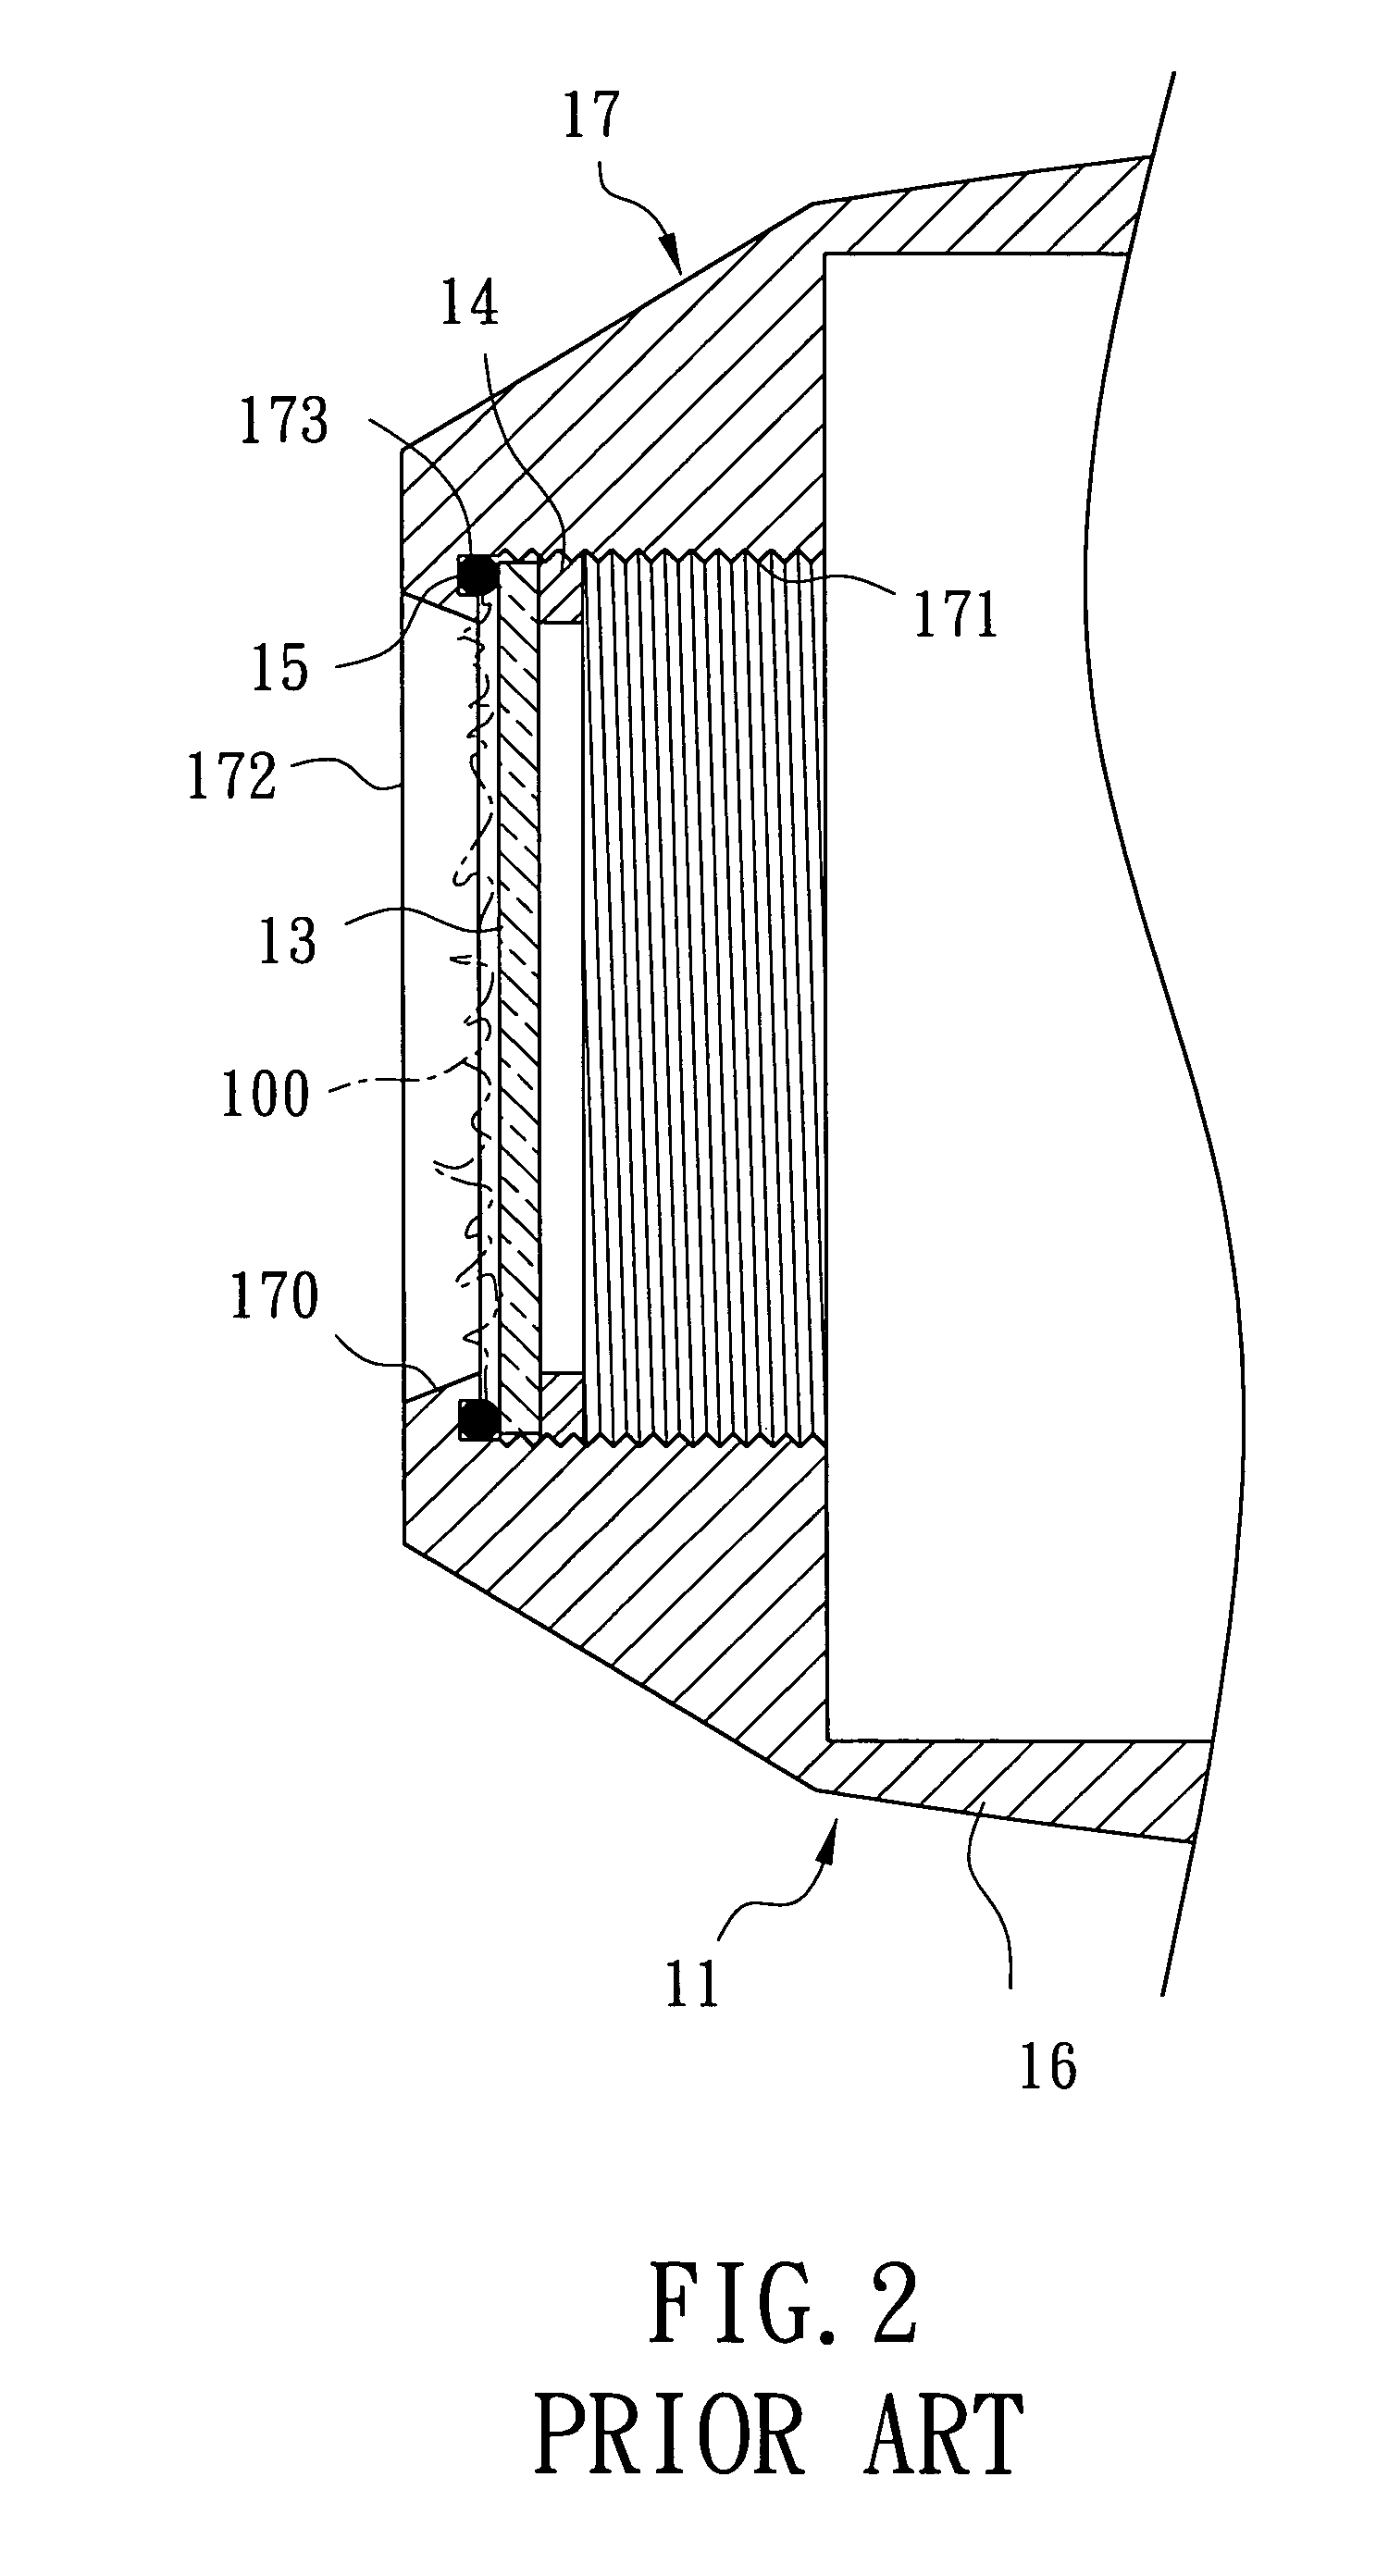 Underwater housing for a monitoring device